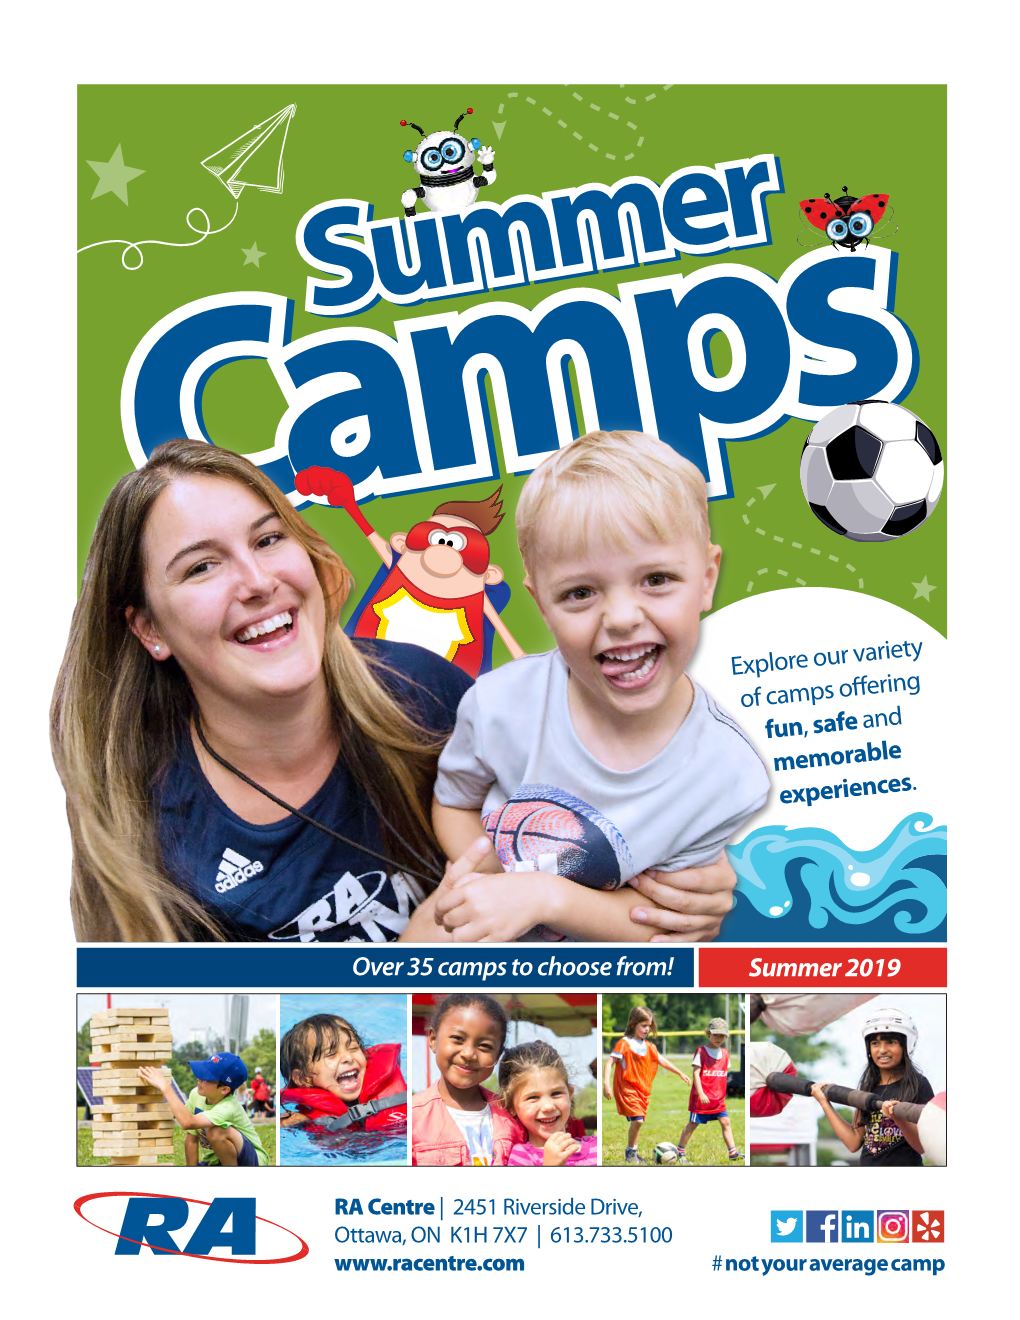 Over 35 Camps to Choose From! Summer 2019